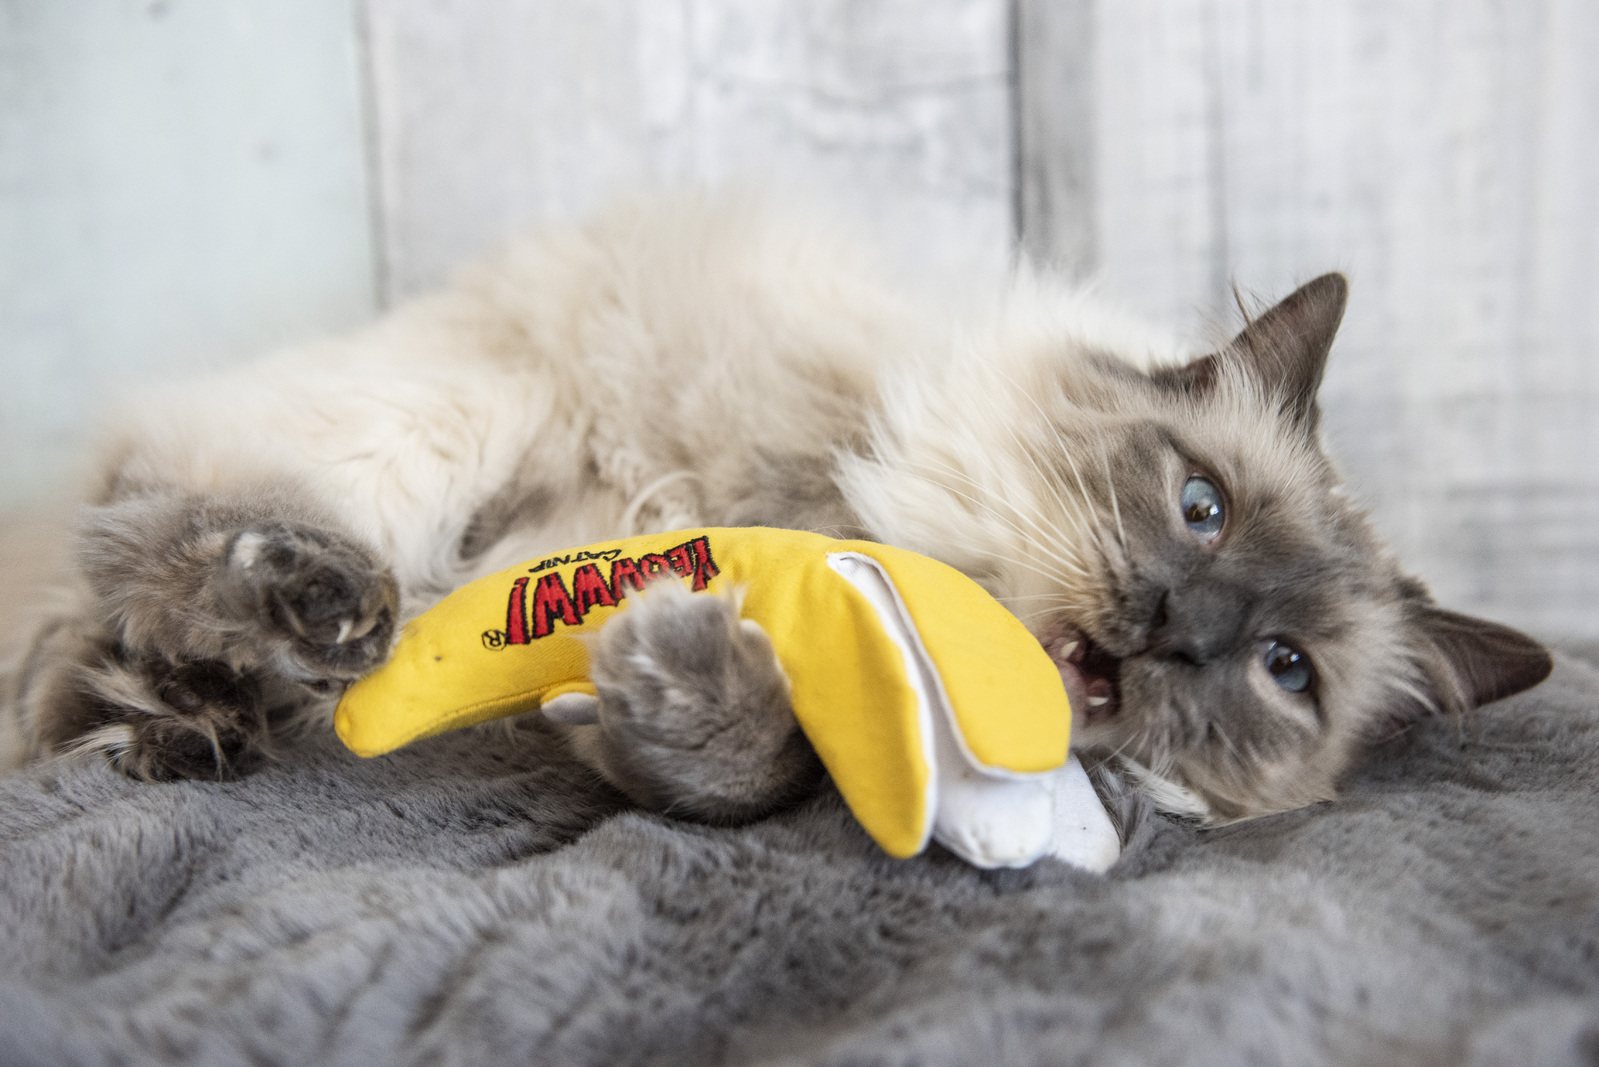 Yeowww! Cat Toys with Pure American Catnip - Peeled banana image 2